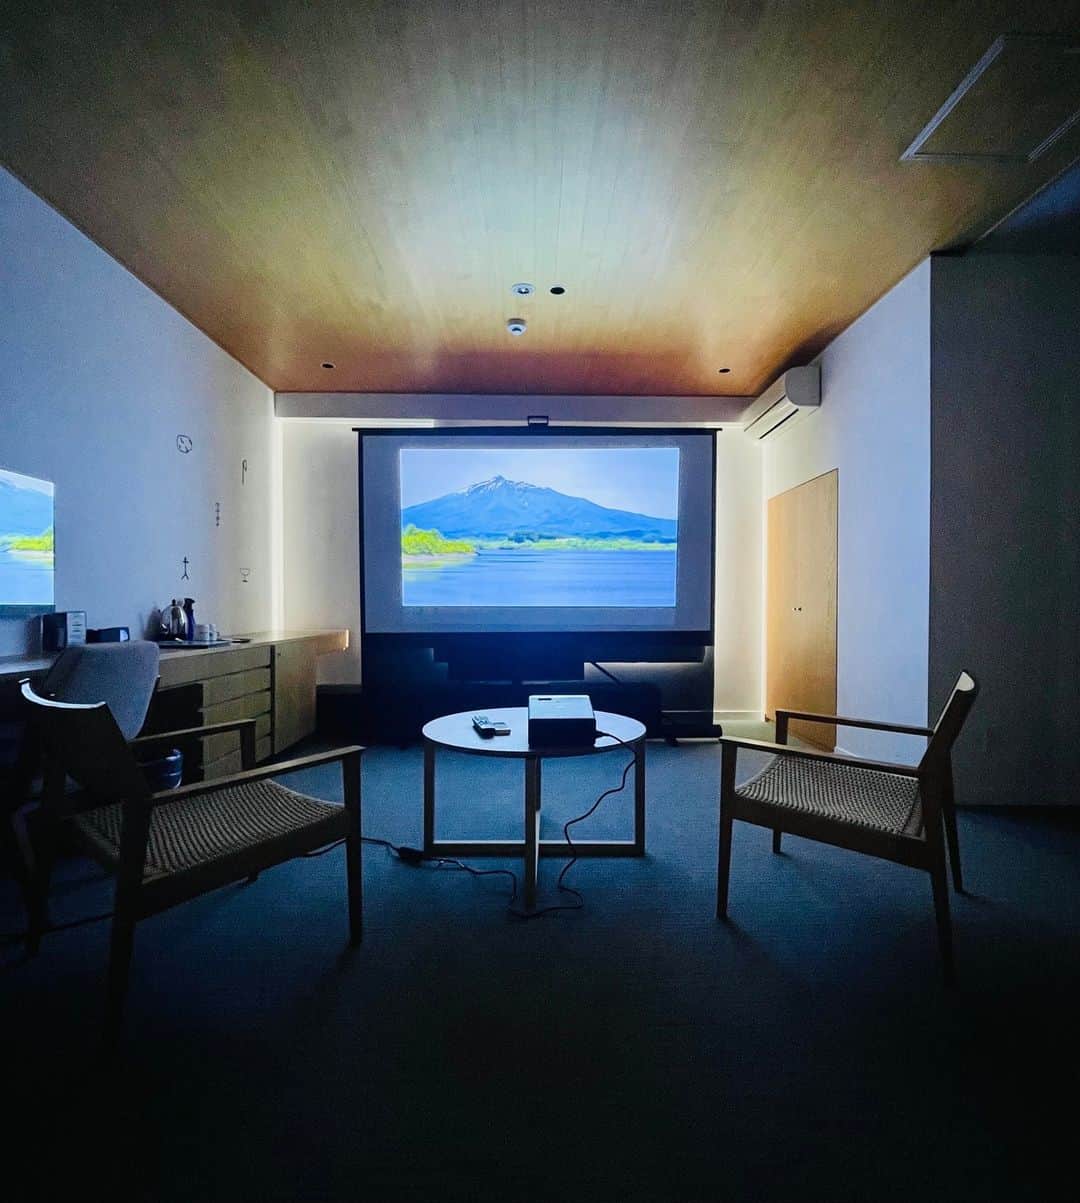 hotelgraphynezuさんのインスタグラム写真 - (hotelgraphynezuInstagram)「Deluxe Theater King Room  Introduction⁠ ⁠ Hi everyone.⁠ At HOTEL GRAPHY NEZU, we do have multiple room types and we would like to introduce to you the biggest room type we have and its benefits.⁠ ⁠ Our Deluxe Theater King Room in  numbers :⁠ -33m2 ⁠ -240 cm King size bed⁠ -4th Floor ⁠ -1 living space⁠ -1 large bathroom⁠ -100 inch screen + a projector⁠ ⁠ We highly recommend this room for families with young kids, or for anniversary occasions and surprises.⁠ ⁠ This room is also appreciated to enjoy a private cinema session in a comfortable and large bed with friends or family.⁠ ⁠ Try it out !⁠  ⁠ ⁠Details on https://hotel-graphy.com ⁠ーーーーーーーー  デラックス シアター キング ルームのご紹介⁠  ⁠  みなさん、こんにちは。⁠  HOTEL GRAPHY NEZUでは複数のお部屋タイプをご用意しておりますが、最大のお部屋タイプとそのメリットをご紹介したいと思います。  ⁠  デラックス シアター キング ルームのメリット:⁠  -33m2 ⁠  -240cmキングサイズベッド⁠  -4階 ⁠(高層階)  -リビングスペース⁠  - 広いバスルーム付き  -100インチスクリーン+プロジェクター⁠  ⁠  小さなお子様連れのご家族や、記念日やサプライズにおすすめのお部屋です。  ⁠  寝心地の良い大きなベッドで、ご友人やご家族とプライベートシネマを楽しむのにも喜ばれるお部屋です。  ⁠  試してみてください!⁠  ⁠  ⁠詳細はhttps://hotel-graphy.com  ⁠  .⁠ .⁠ .⁠ #explorelively #lifestylehotel #hotelgraphynezu⁠ ⁠ #deluxeroom #widehotelroom #deluxetheaterkingroom⁠ #yanesen #nezuhotel #theaterroom #projectorroom #tokyohotel #tokyohostel #tokyotrip #japantravel #hostellife  #ホテルグラフィー根津 #デラックスキングルーム #ホテル#客室 #東京ホテル #東京ホステル #谷根千 #下町 #ライフスタイルホテル」3月31日 22時25分 - hotelgraphy_nezu